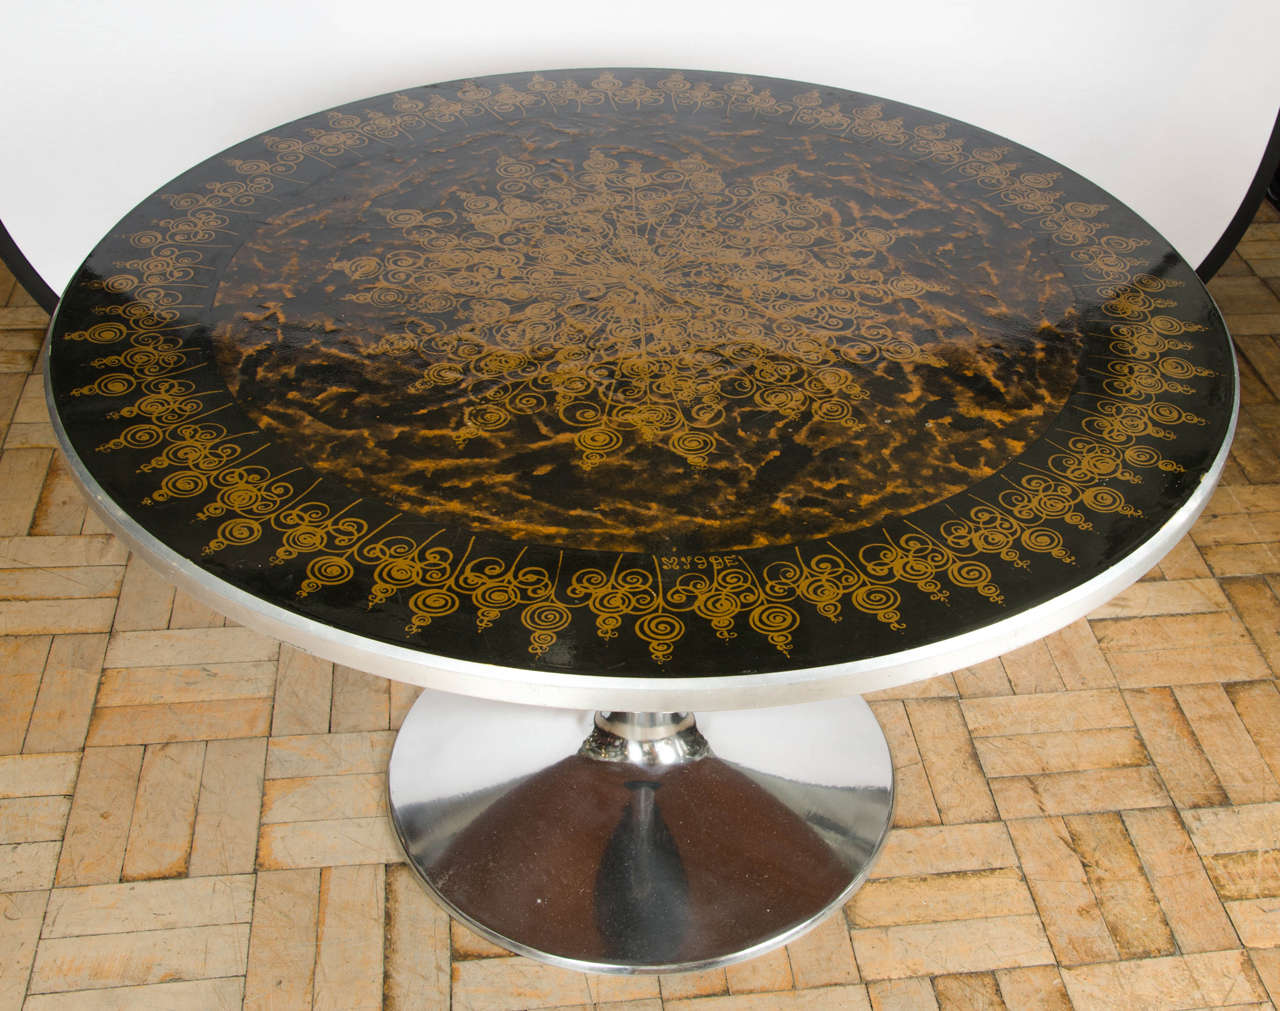 An early 1970's centre table with painted and gilded top, with an aluminium base, by Susanne Fjeldsøe Mygge.

Signed Mygge.

Produced by France and Sons CADO